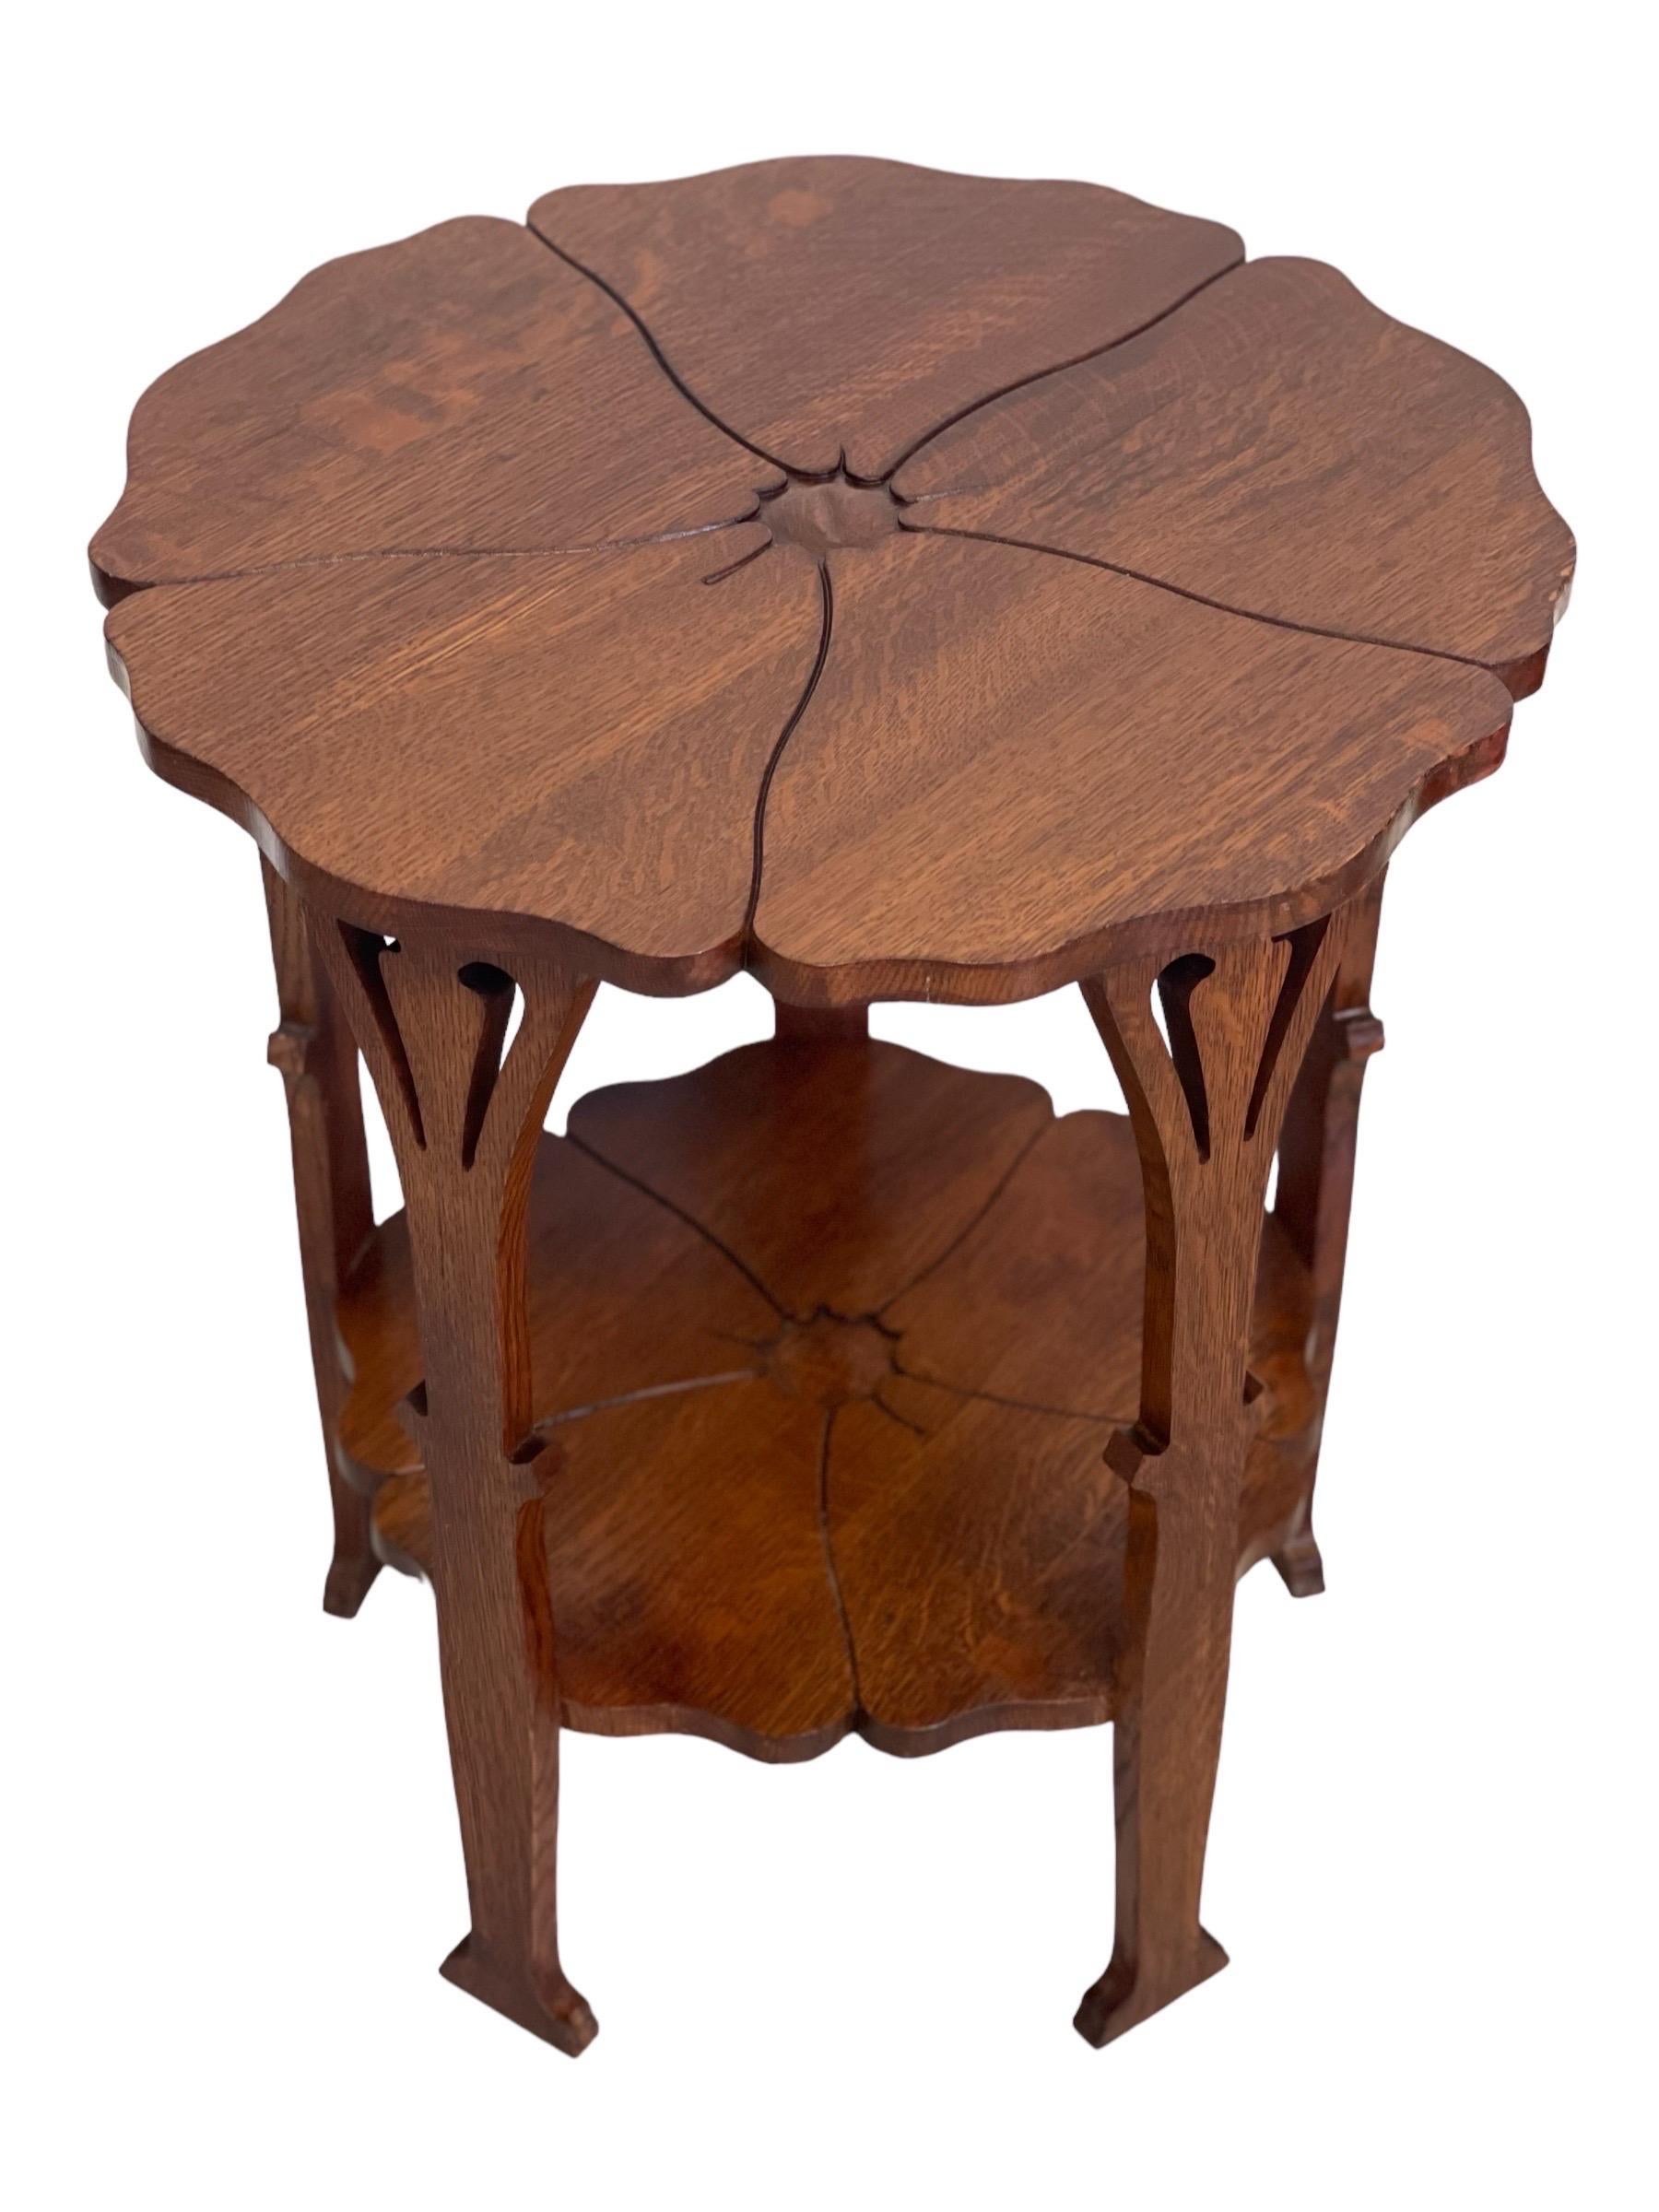 This delicately designed Gustave Stickley Poppy Table was produced for a very short time, beginning in 1900, the design reveals the English roots of the blossoming American Arts and Crafts Movement. One of several table designs based on floral